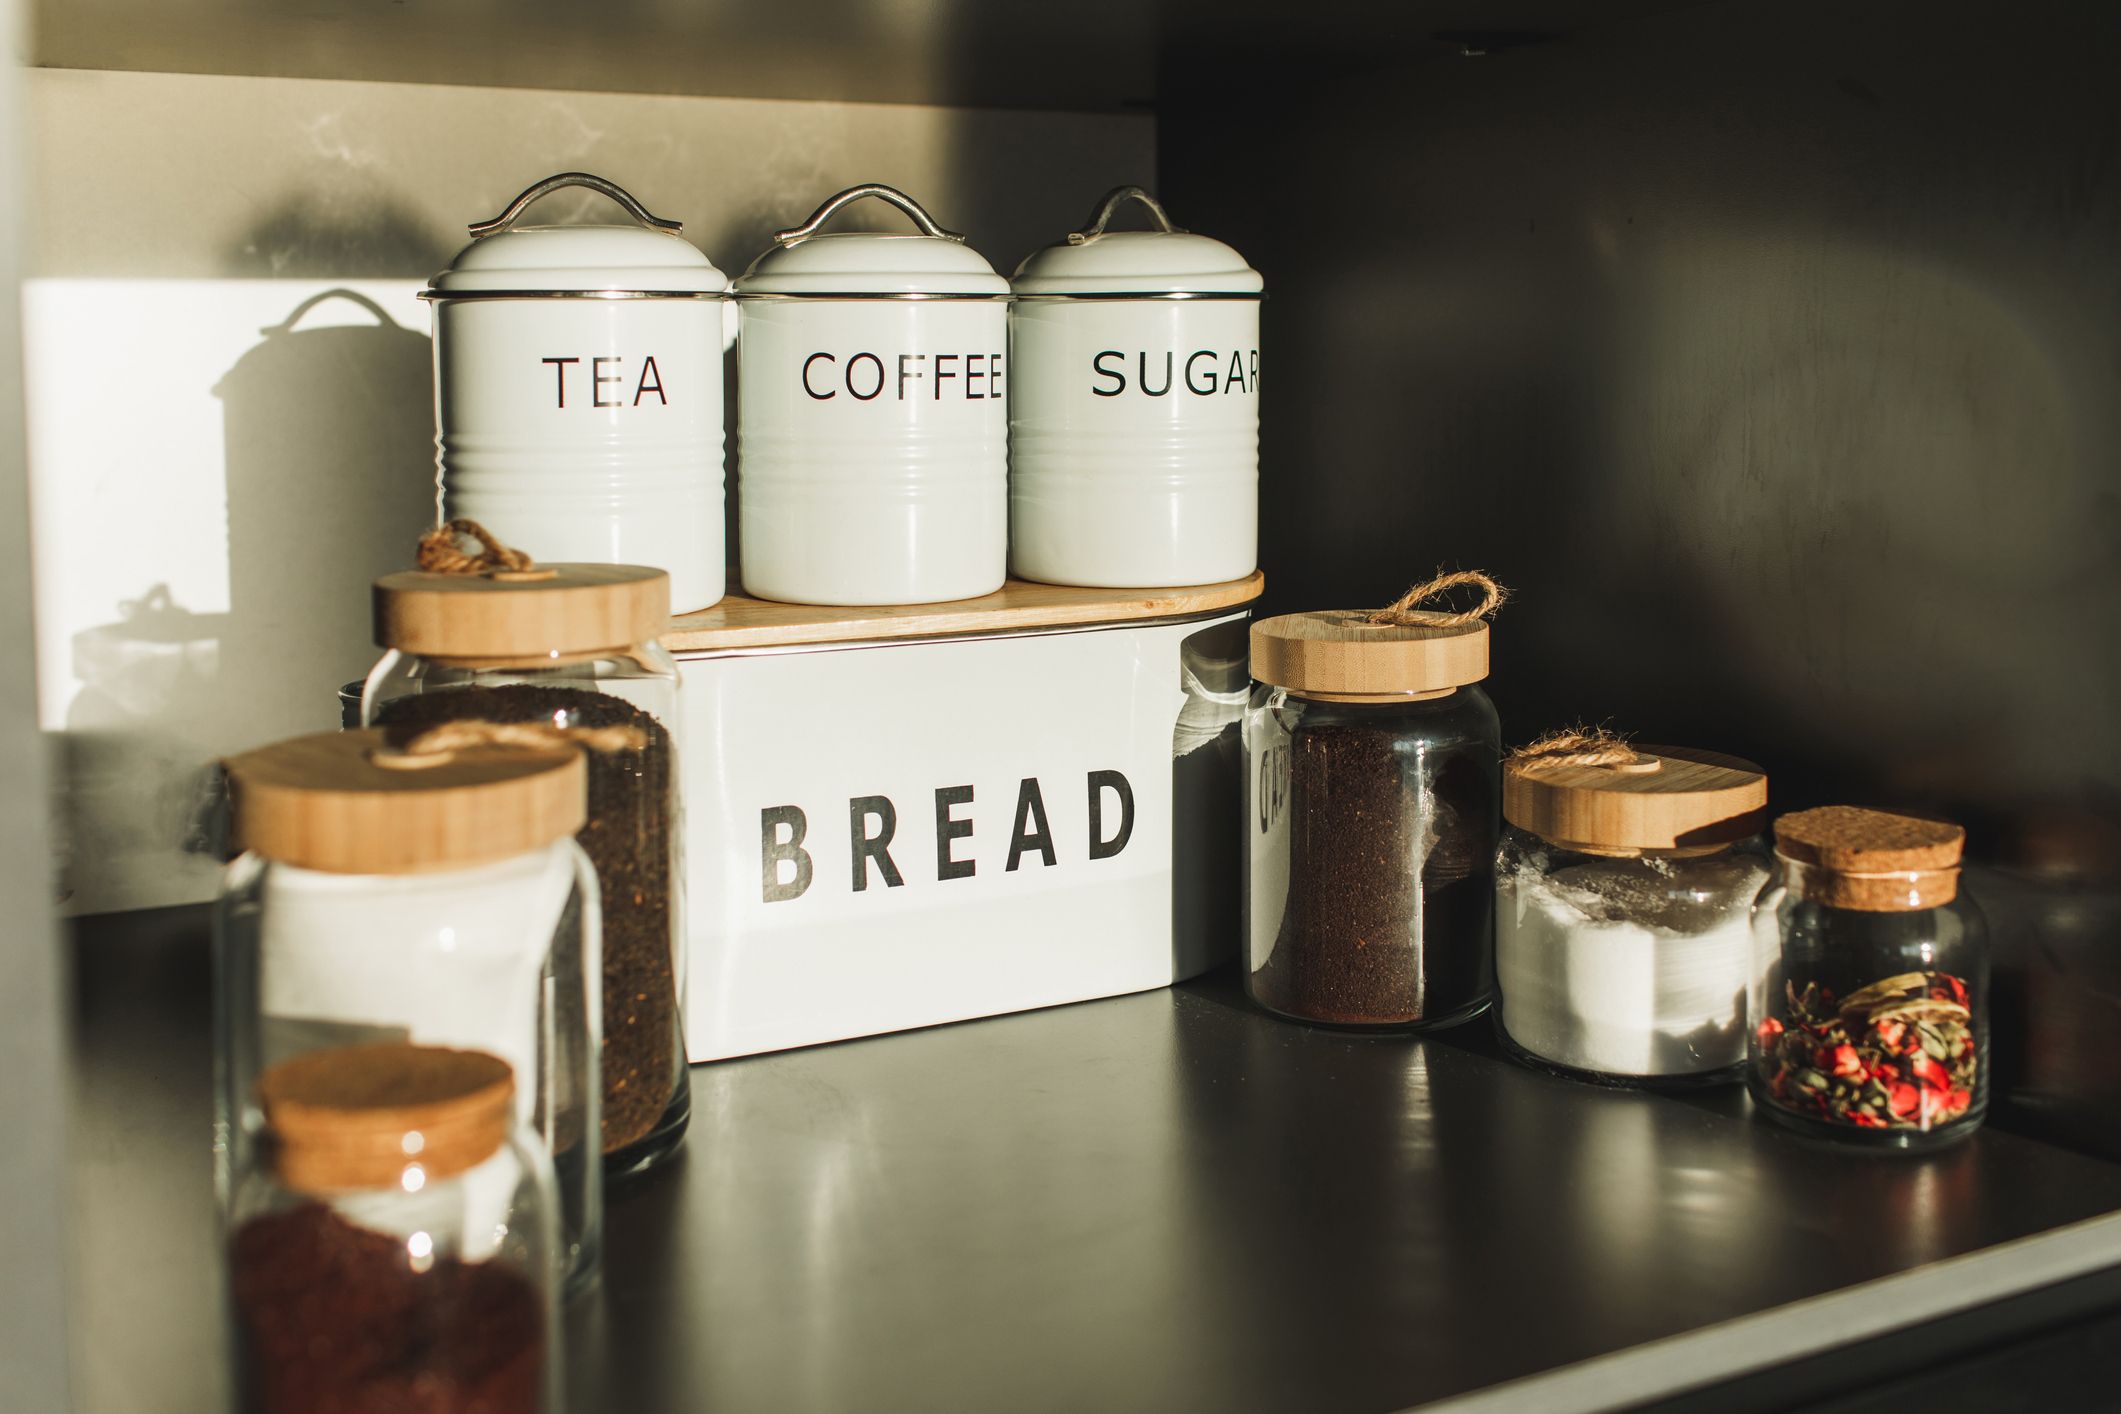 Savvy Food Storage Solutions for Your Kitchen